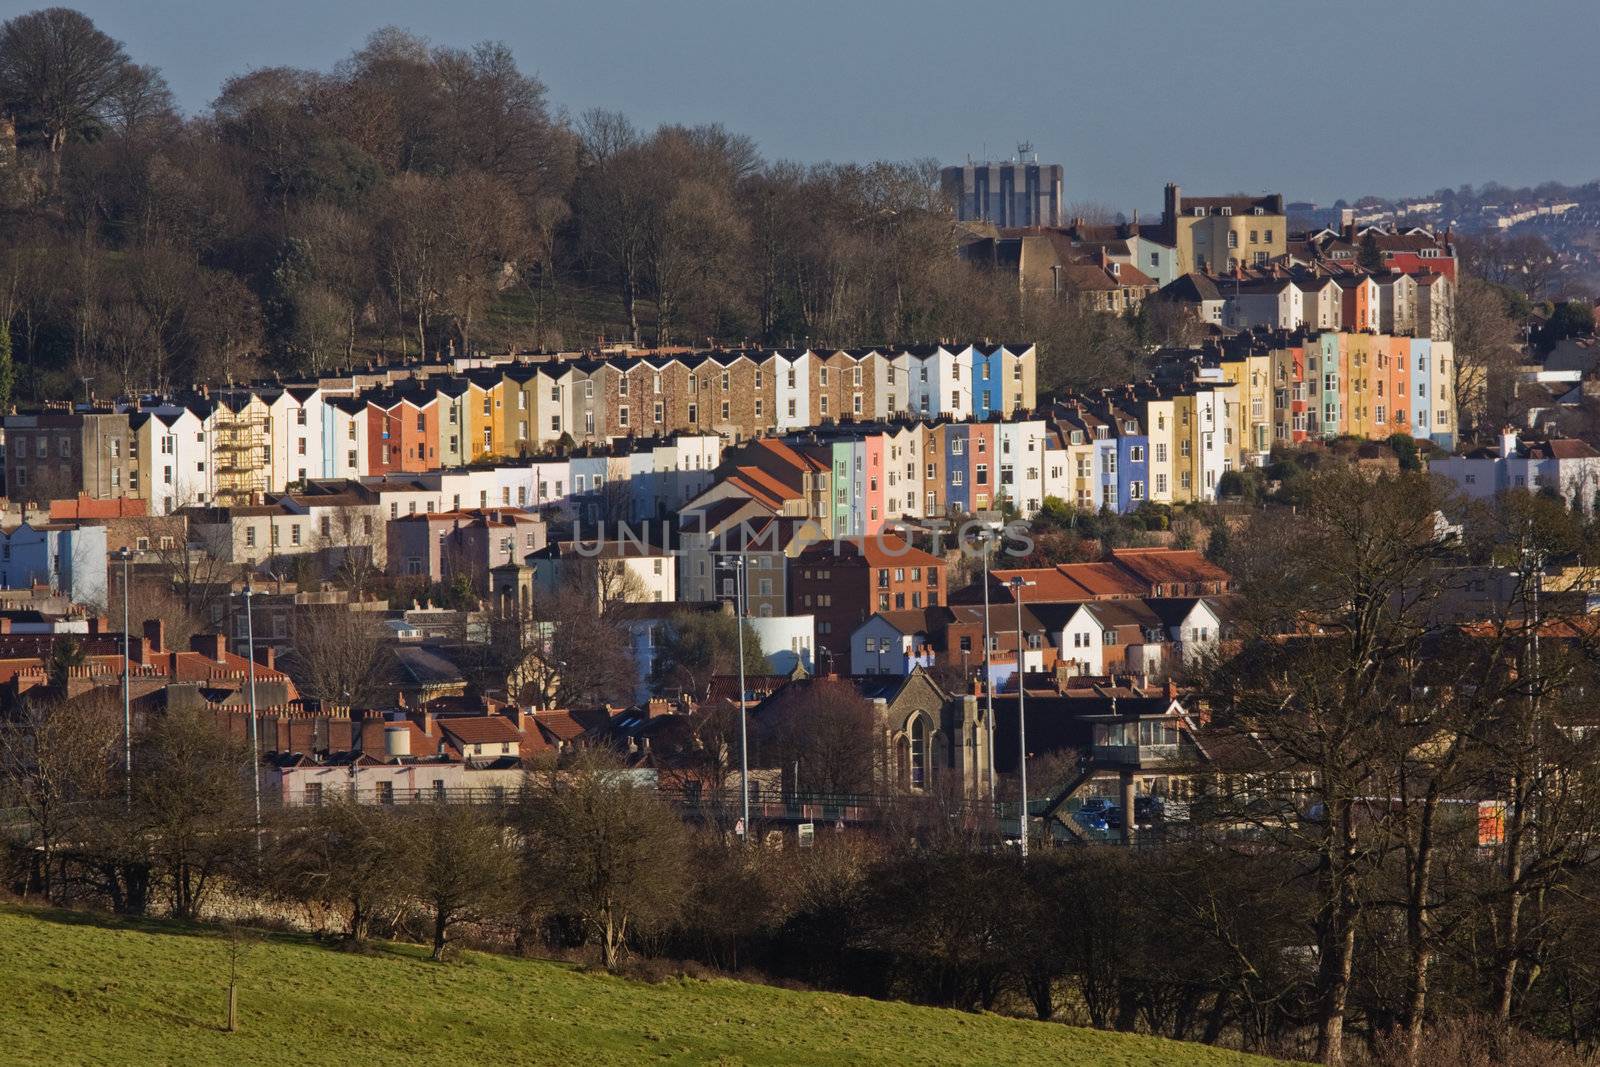 Colourful terraced housing stock in central Bristol UK